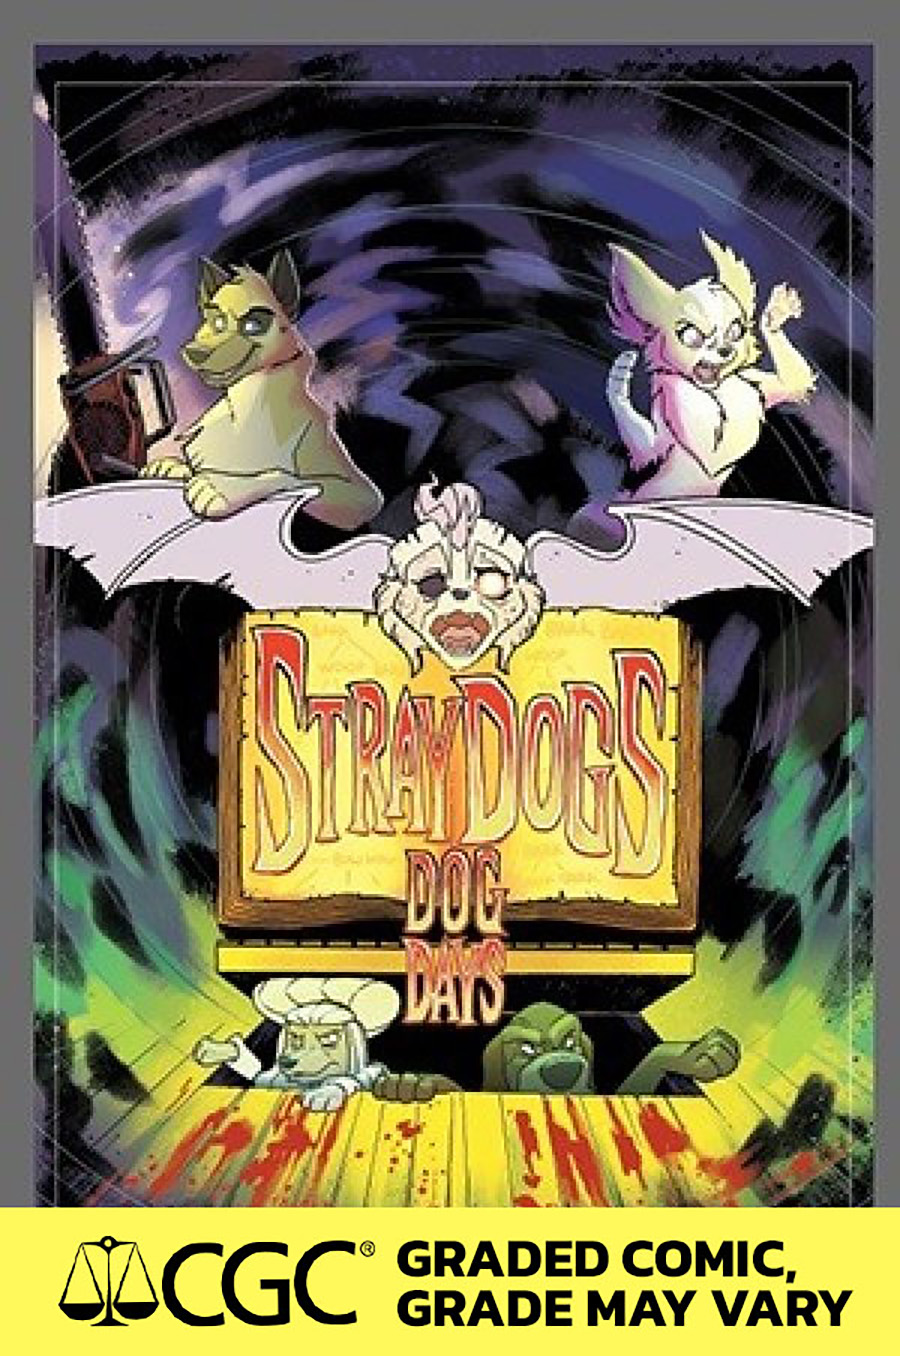 Stray Dogs Dog Days #1 Cover N DF Exclusive Tony Fleecs & Trish Forstner Virgin Variant Cover CGC Graded 9.6 Or Higher